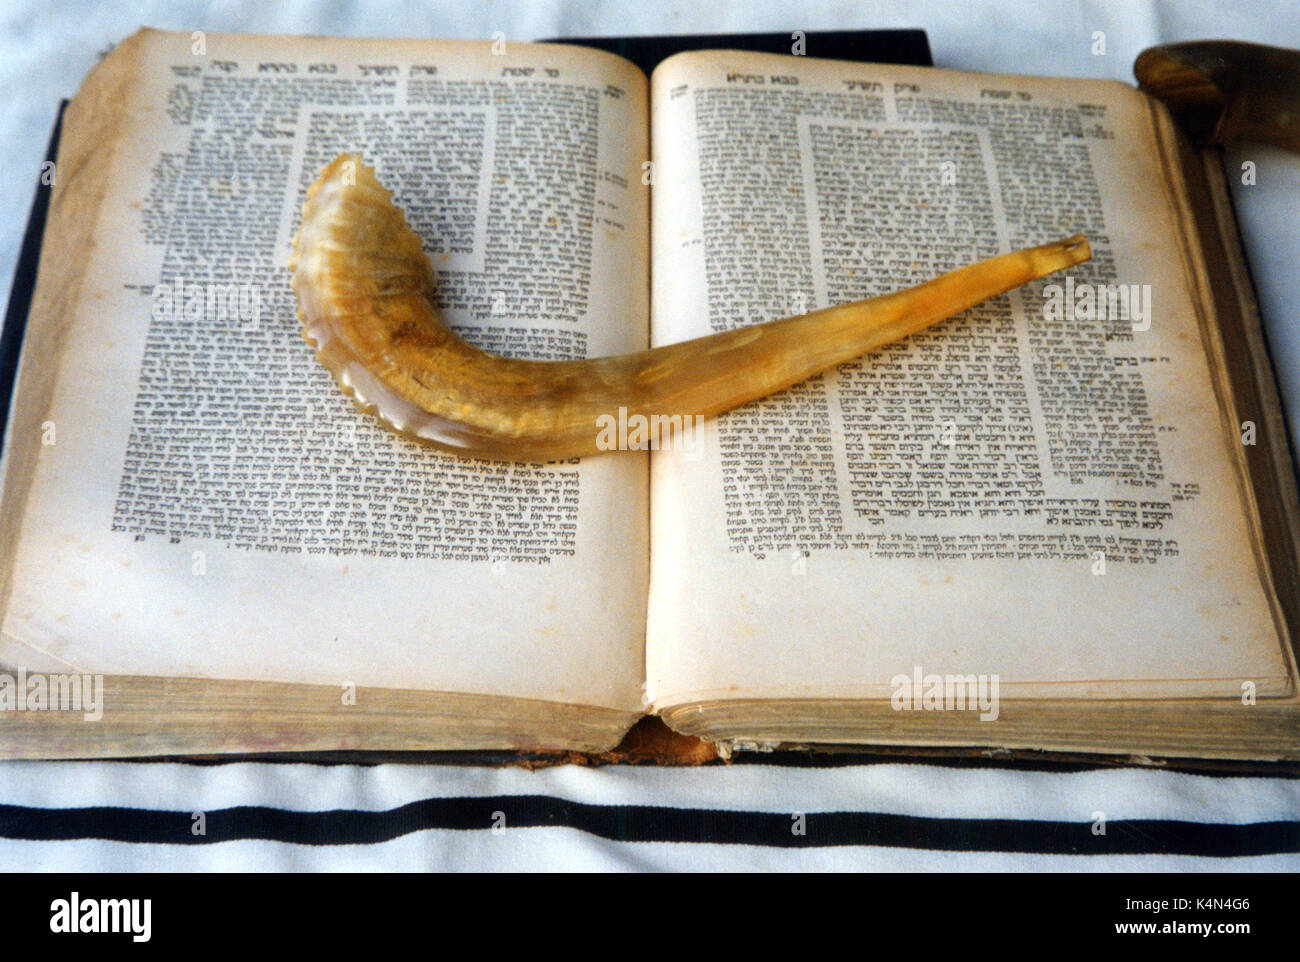 Shofar  (ram's horn) lying on an open copy of Talmud in Hebrew - rabbinic biblical commentary.  Underneath is a prayer shawl (talit) Stock Photo